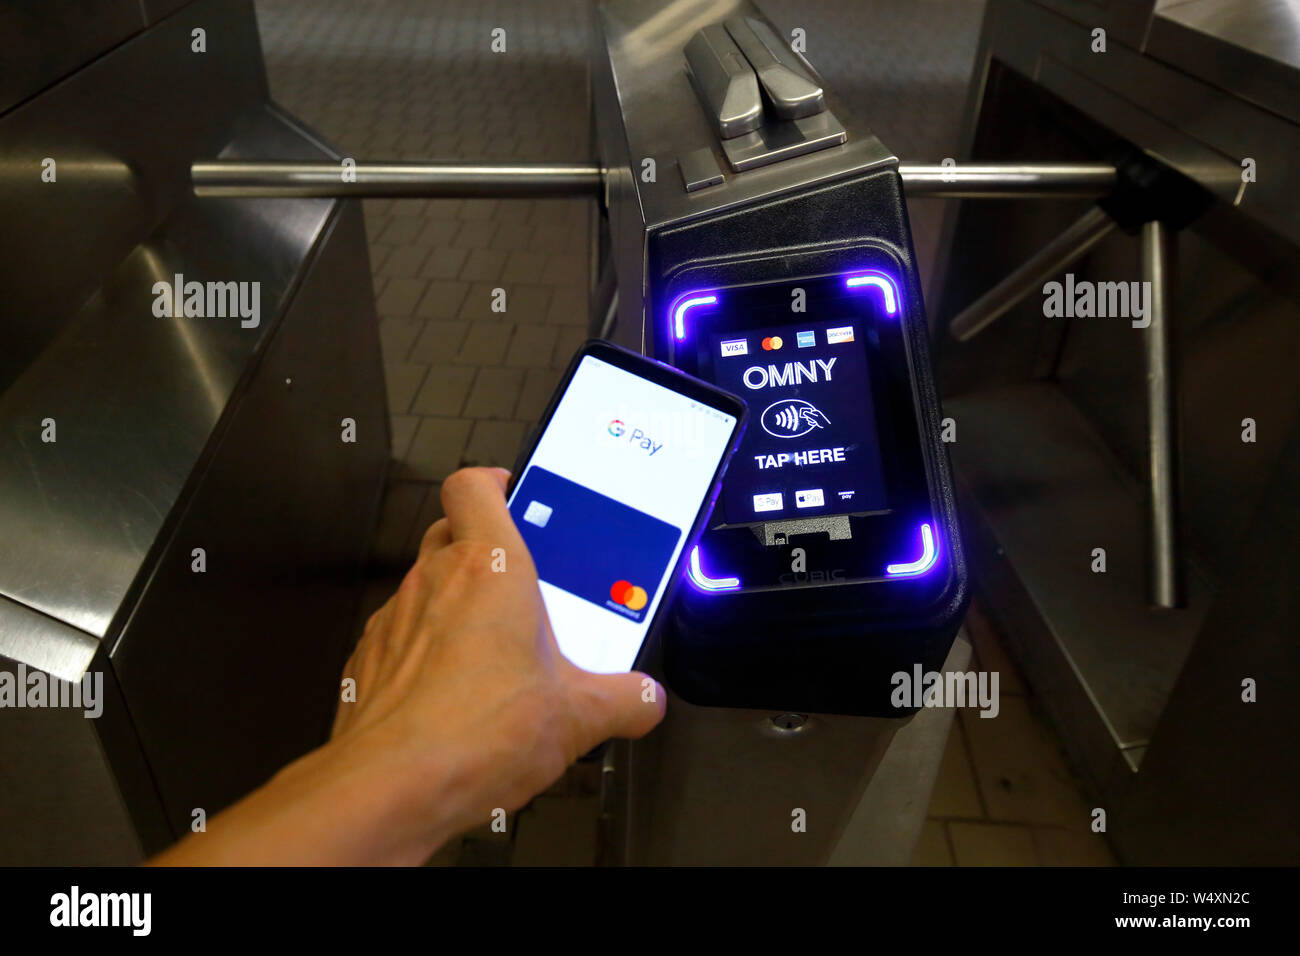 A smartphone with Google Wallet taps a NYC subway turnstile retrofitted with an OMNY contactless payment reader accepting NFC payments Stock Photo